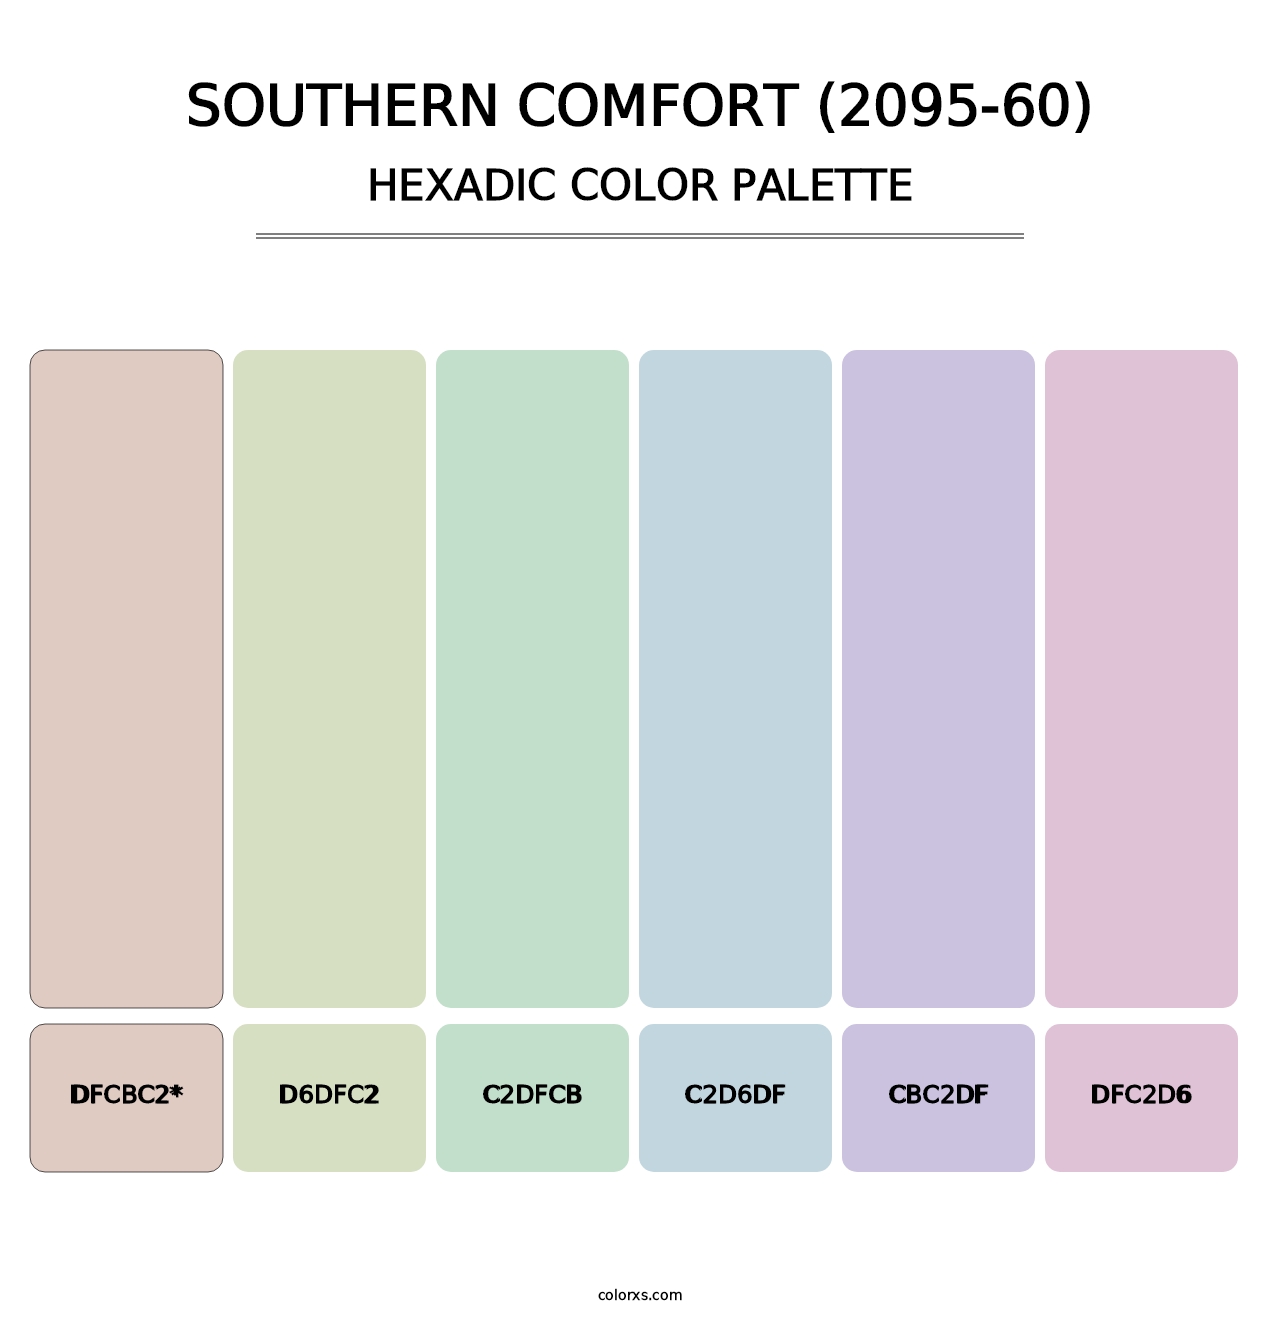 Southern Comfort (2095-60) - Hexadic Color Palette